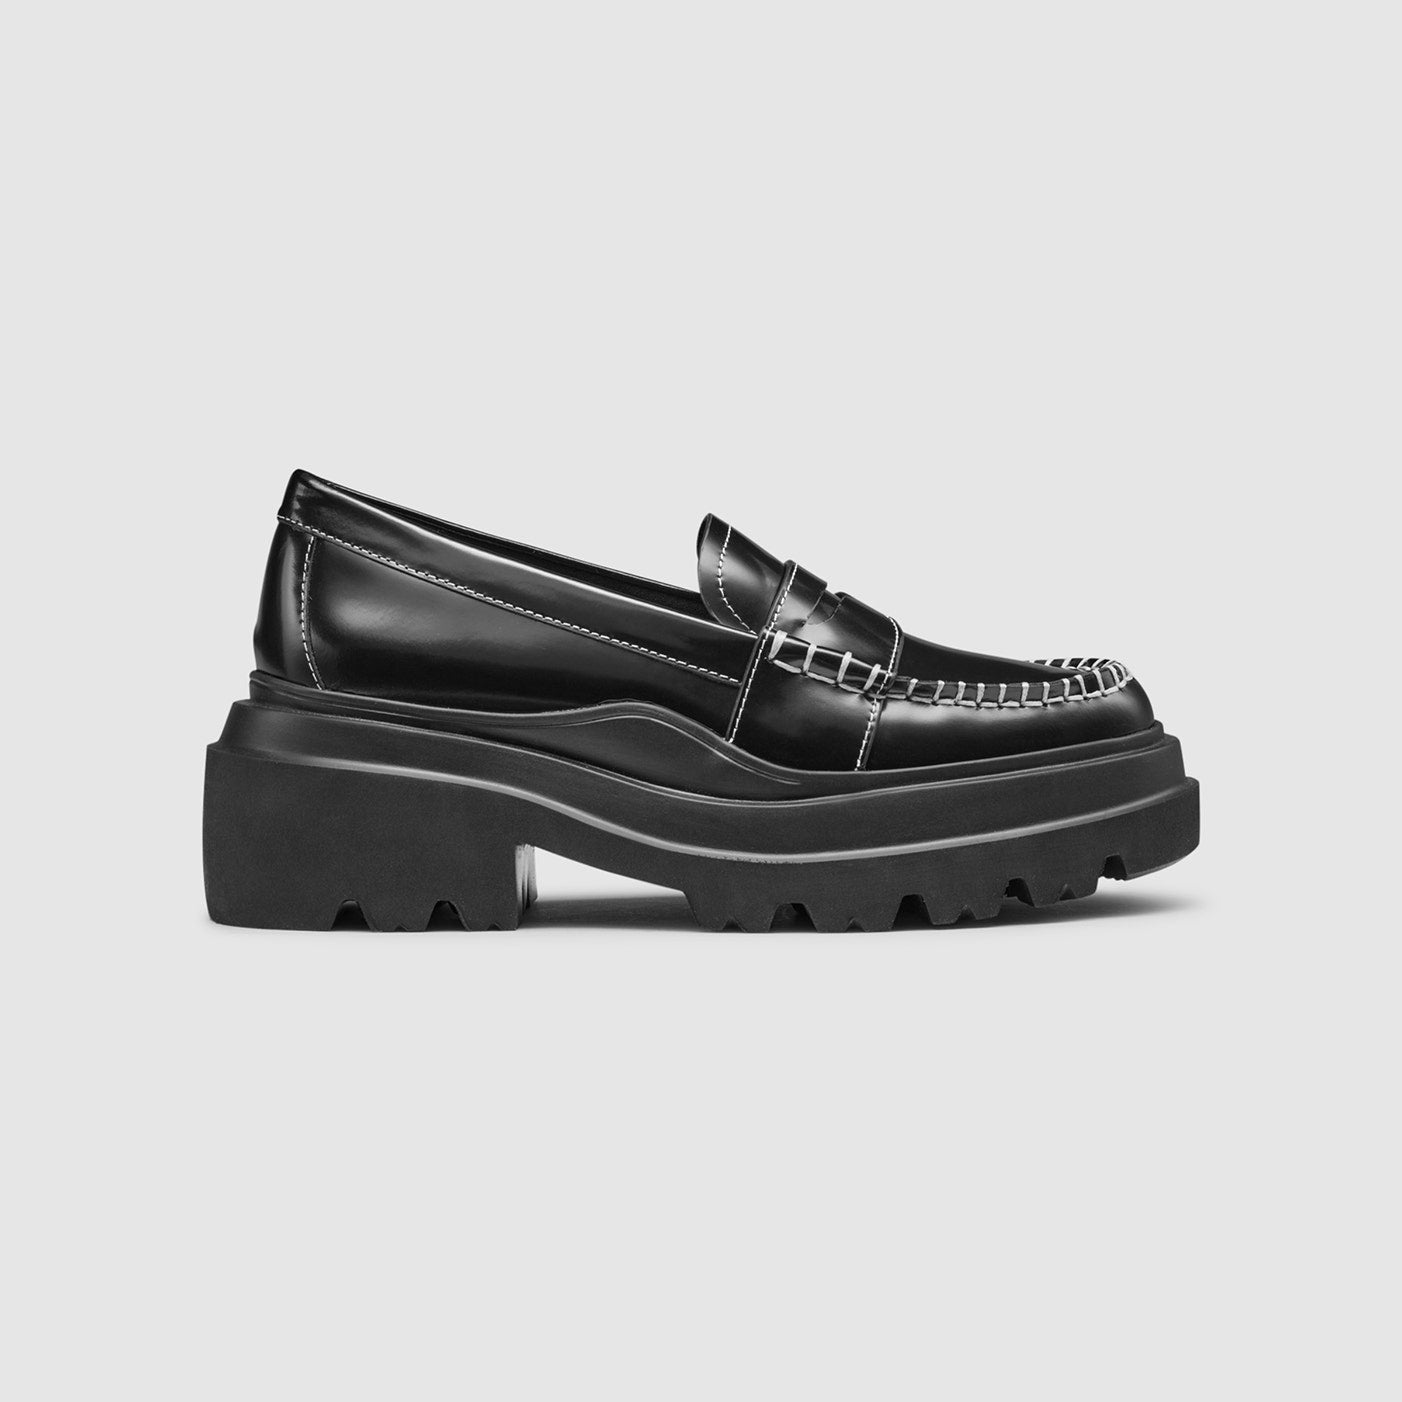 G.H Bass Ella Platform Loafers in Black BAX3D999 | Shop from eightywingold an official brand partner for G.H. Bass in Canada and US.